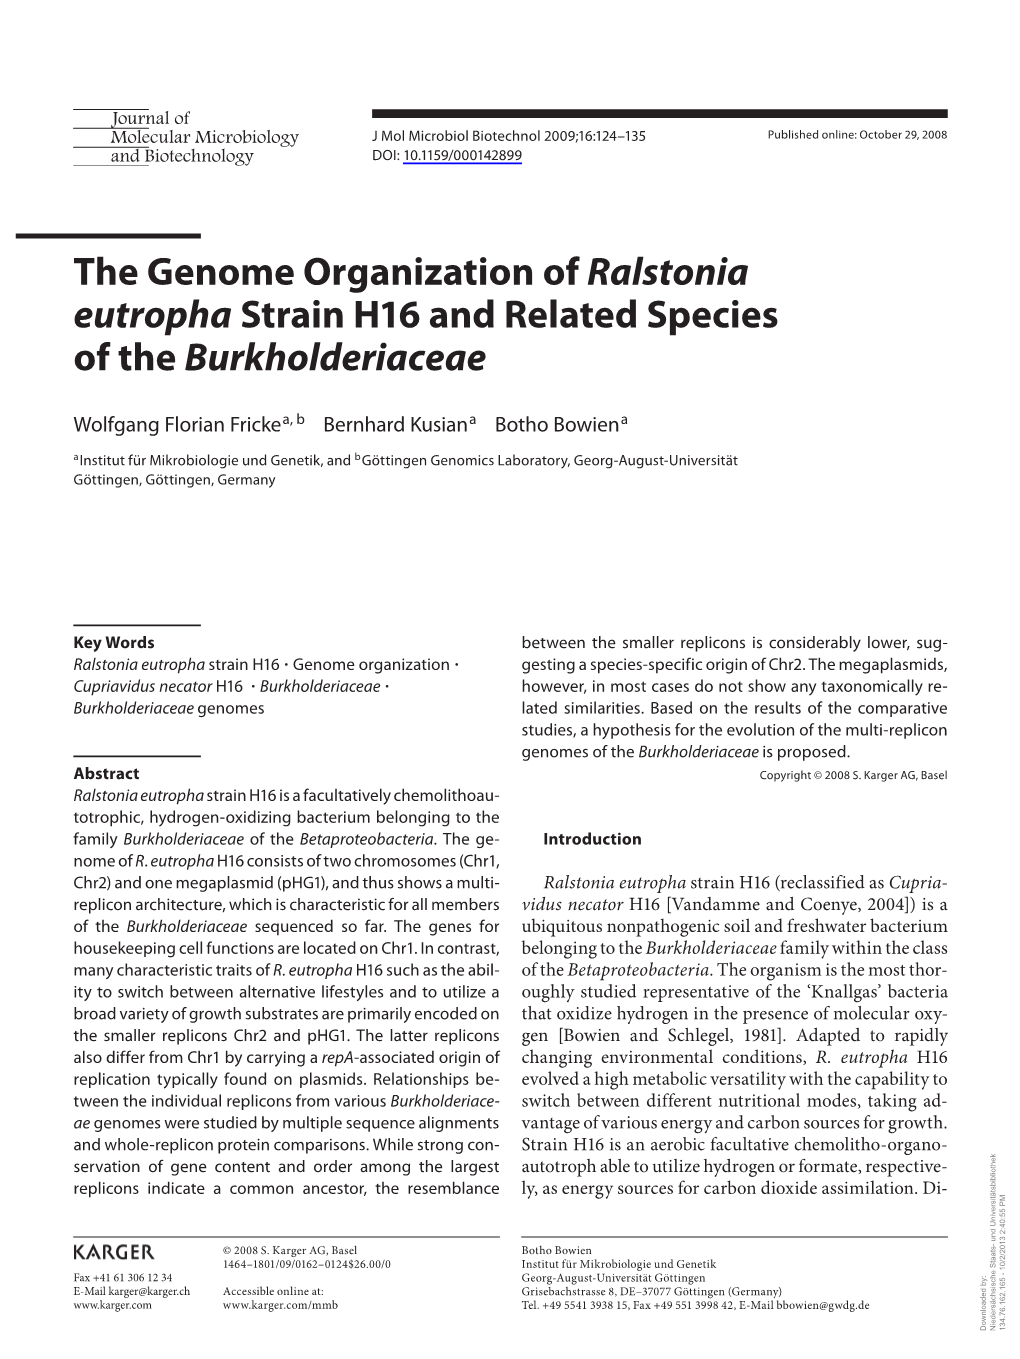 The Genome Organization of Ralstonia Eutropha Strain H16 and Related Species of the Burkholderiaceae